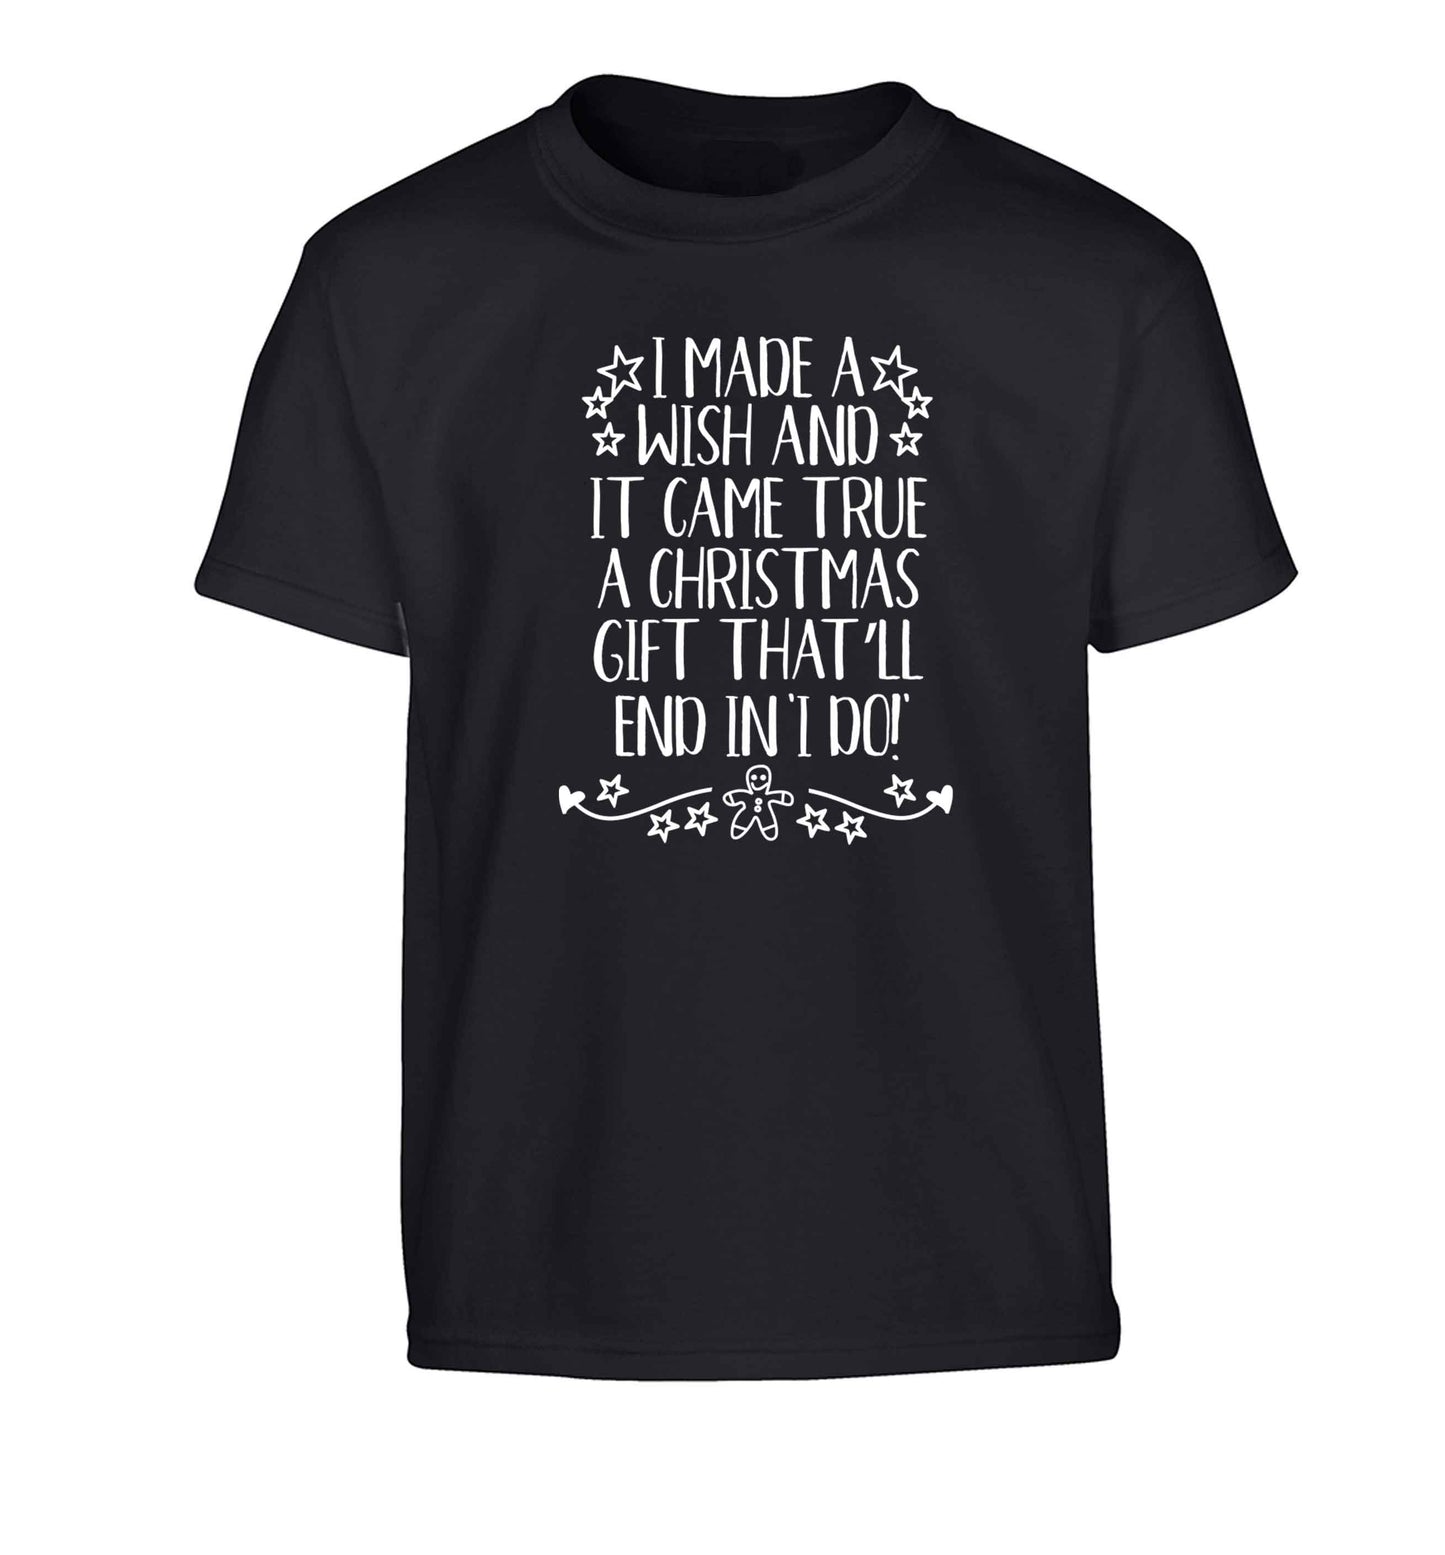 I made a wish and it came true a Christmas gift that'll end in 'I do' Children's black Tshirt 12-13 Years